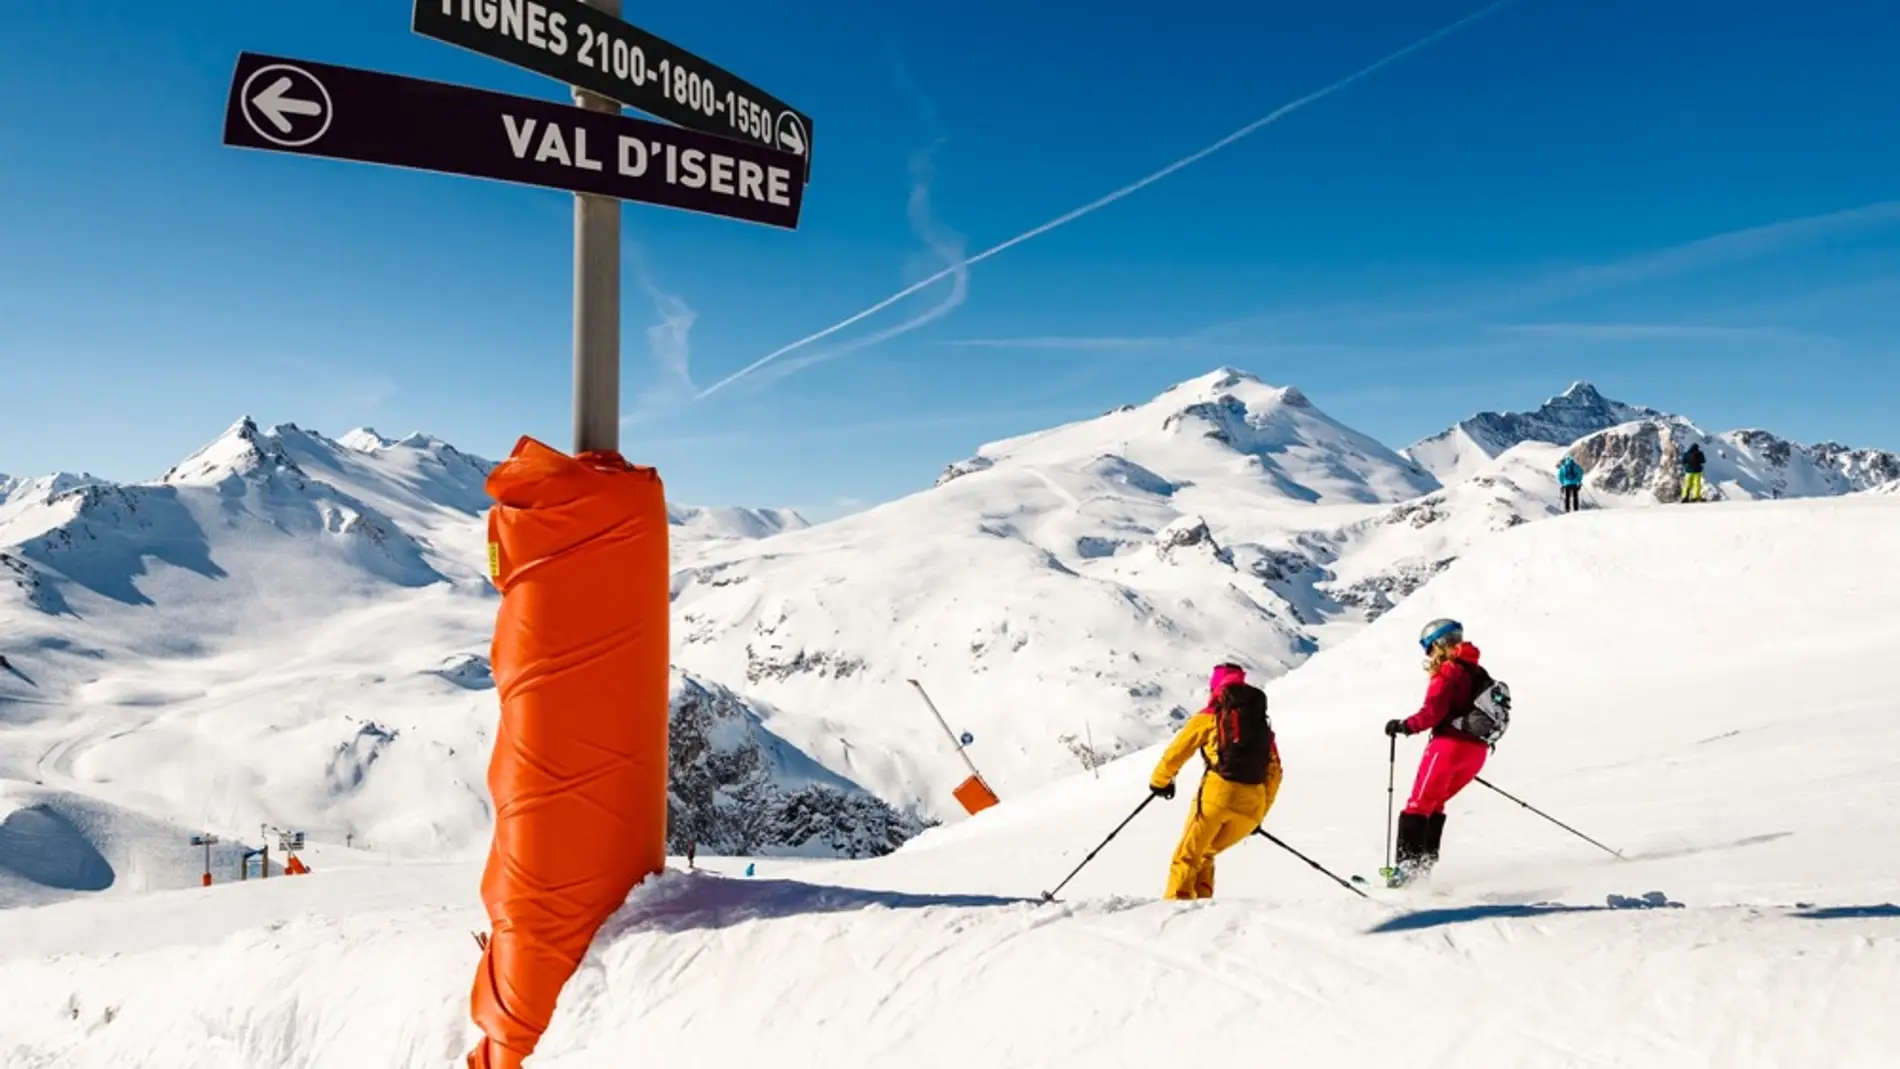 Tinges y Val D'Isere